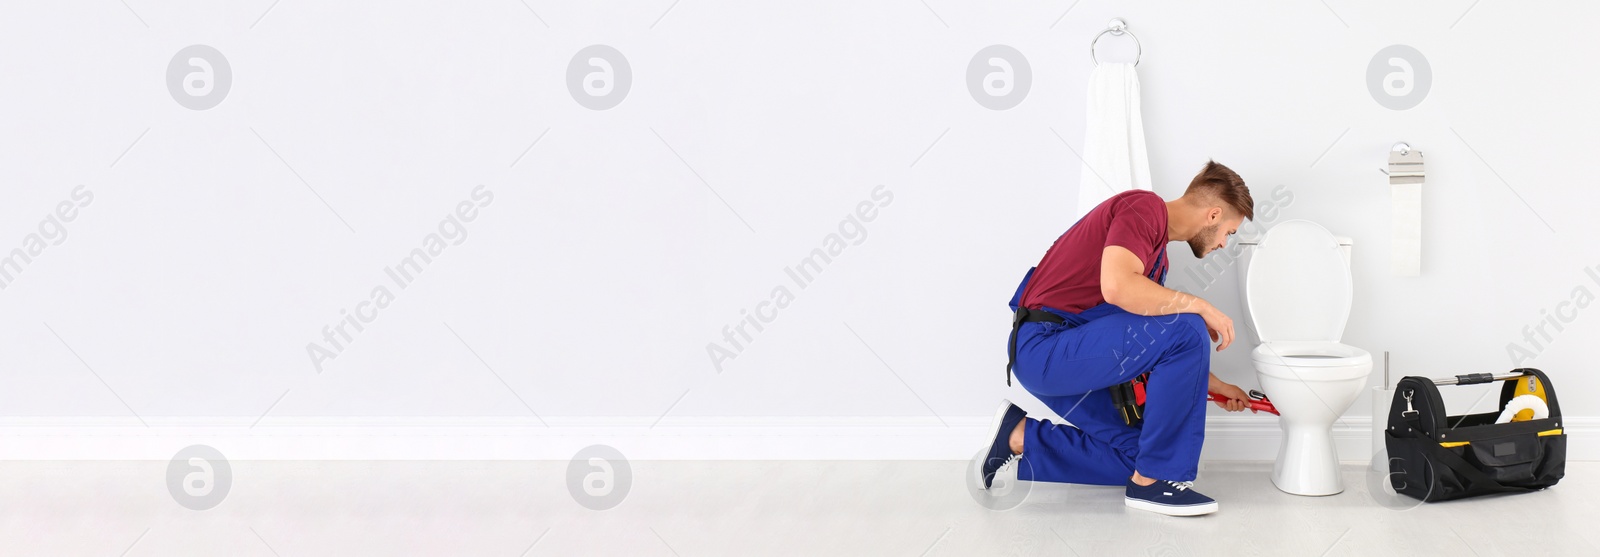 Image of Young man working with toilet bowl in bathroom, space for text. Banner design